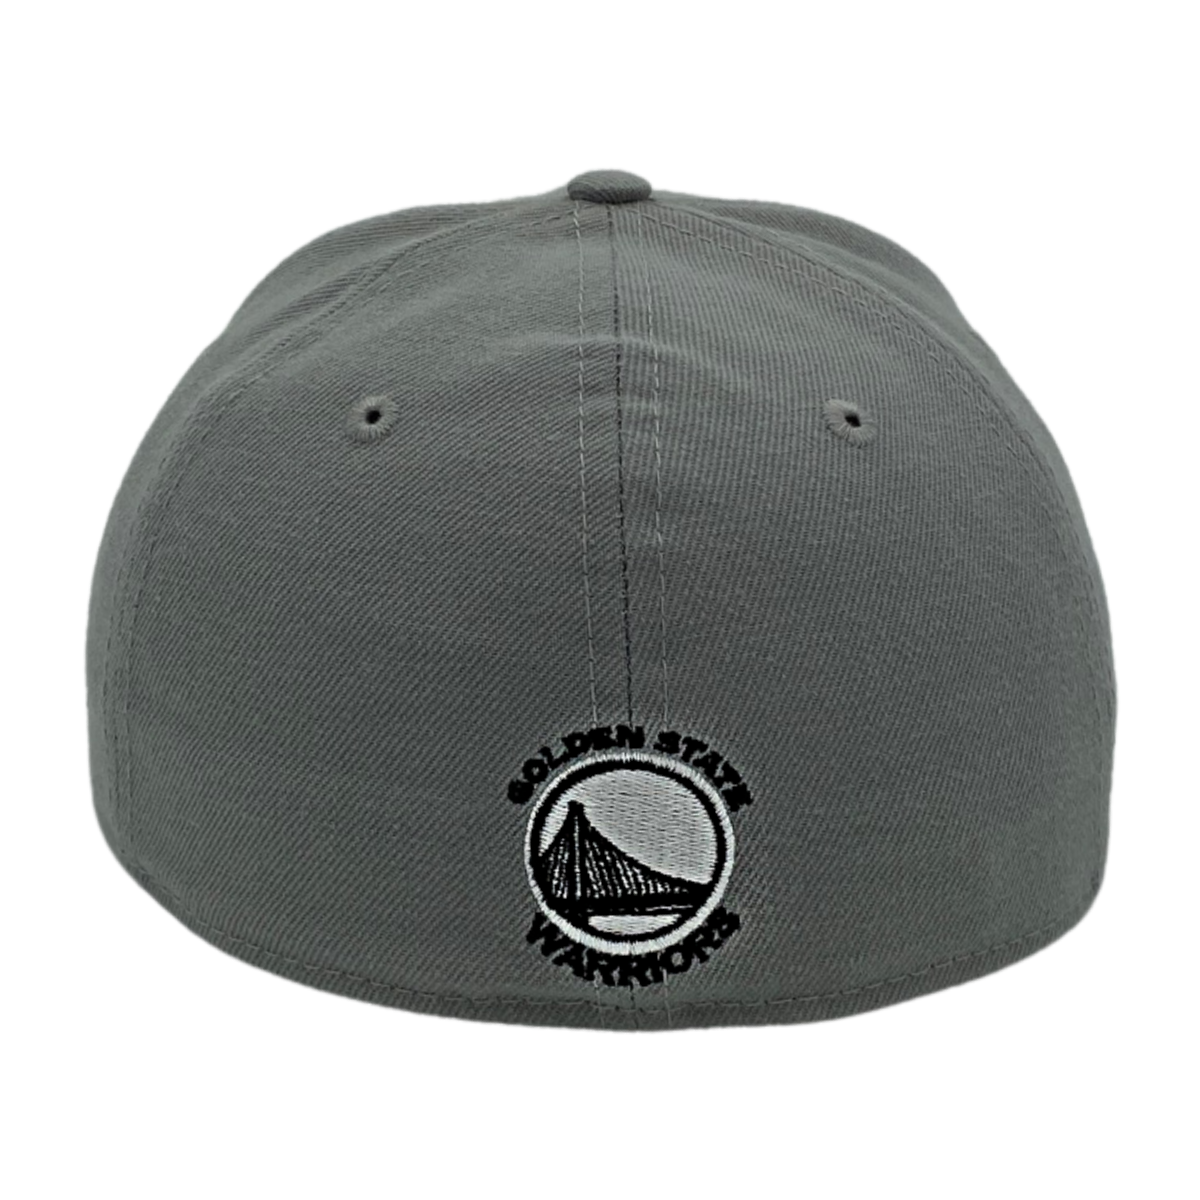 GOLDEN STATE WARRIORS NEW ERA 59FIFTY HAT-GREY/WHITE Nvsoccer.com Thecoliseum